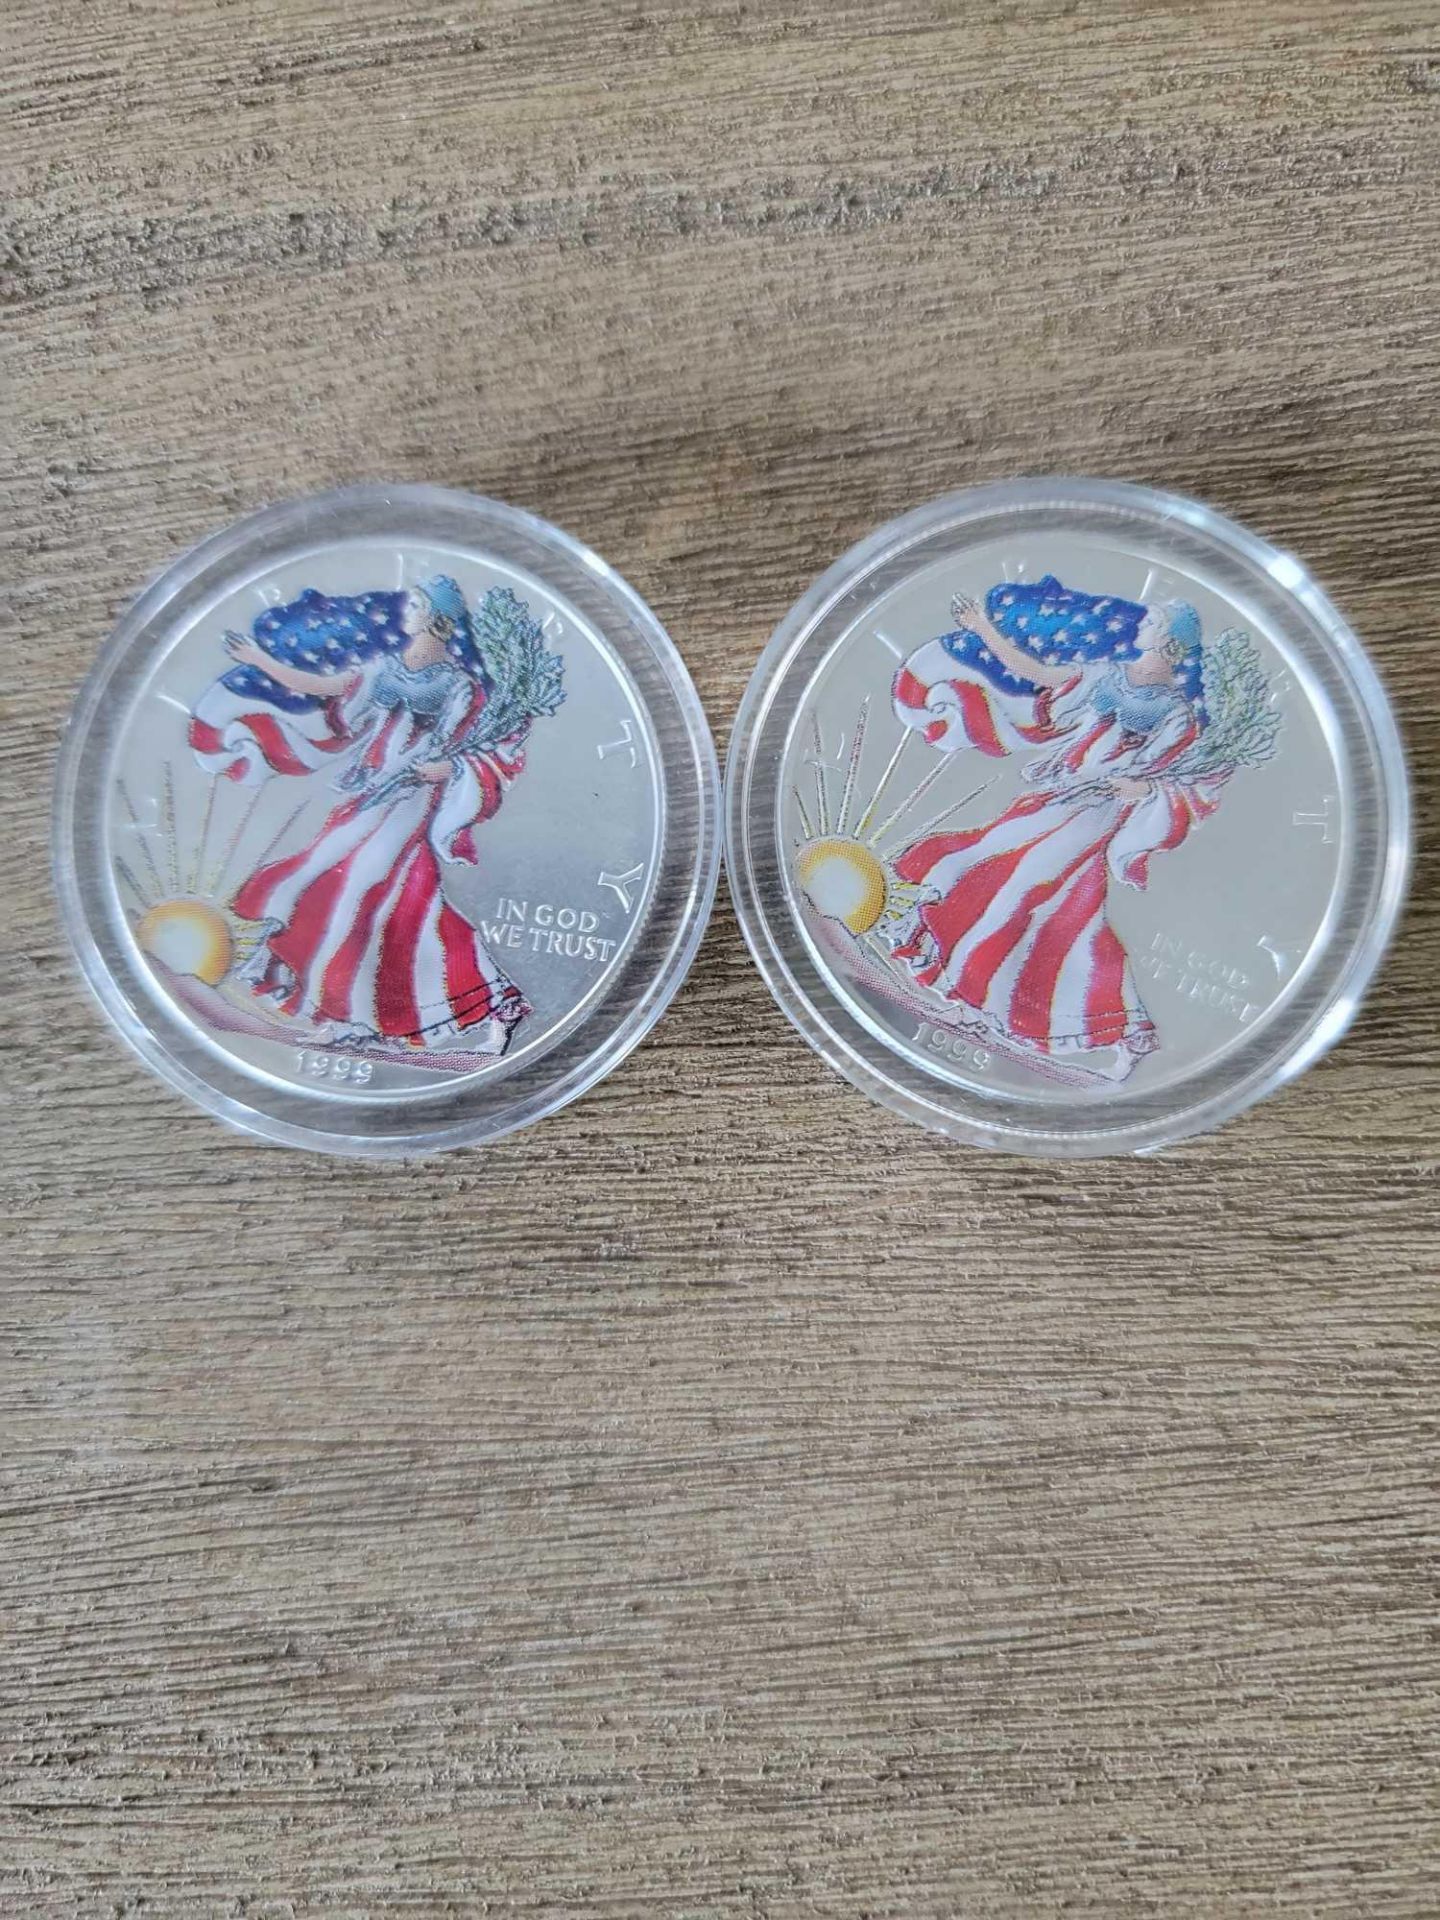 2 1999 Silver Eagle Colored Coins - Image 2 of 4